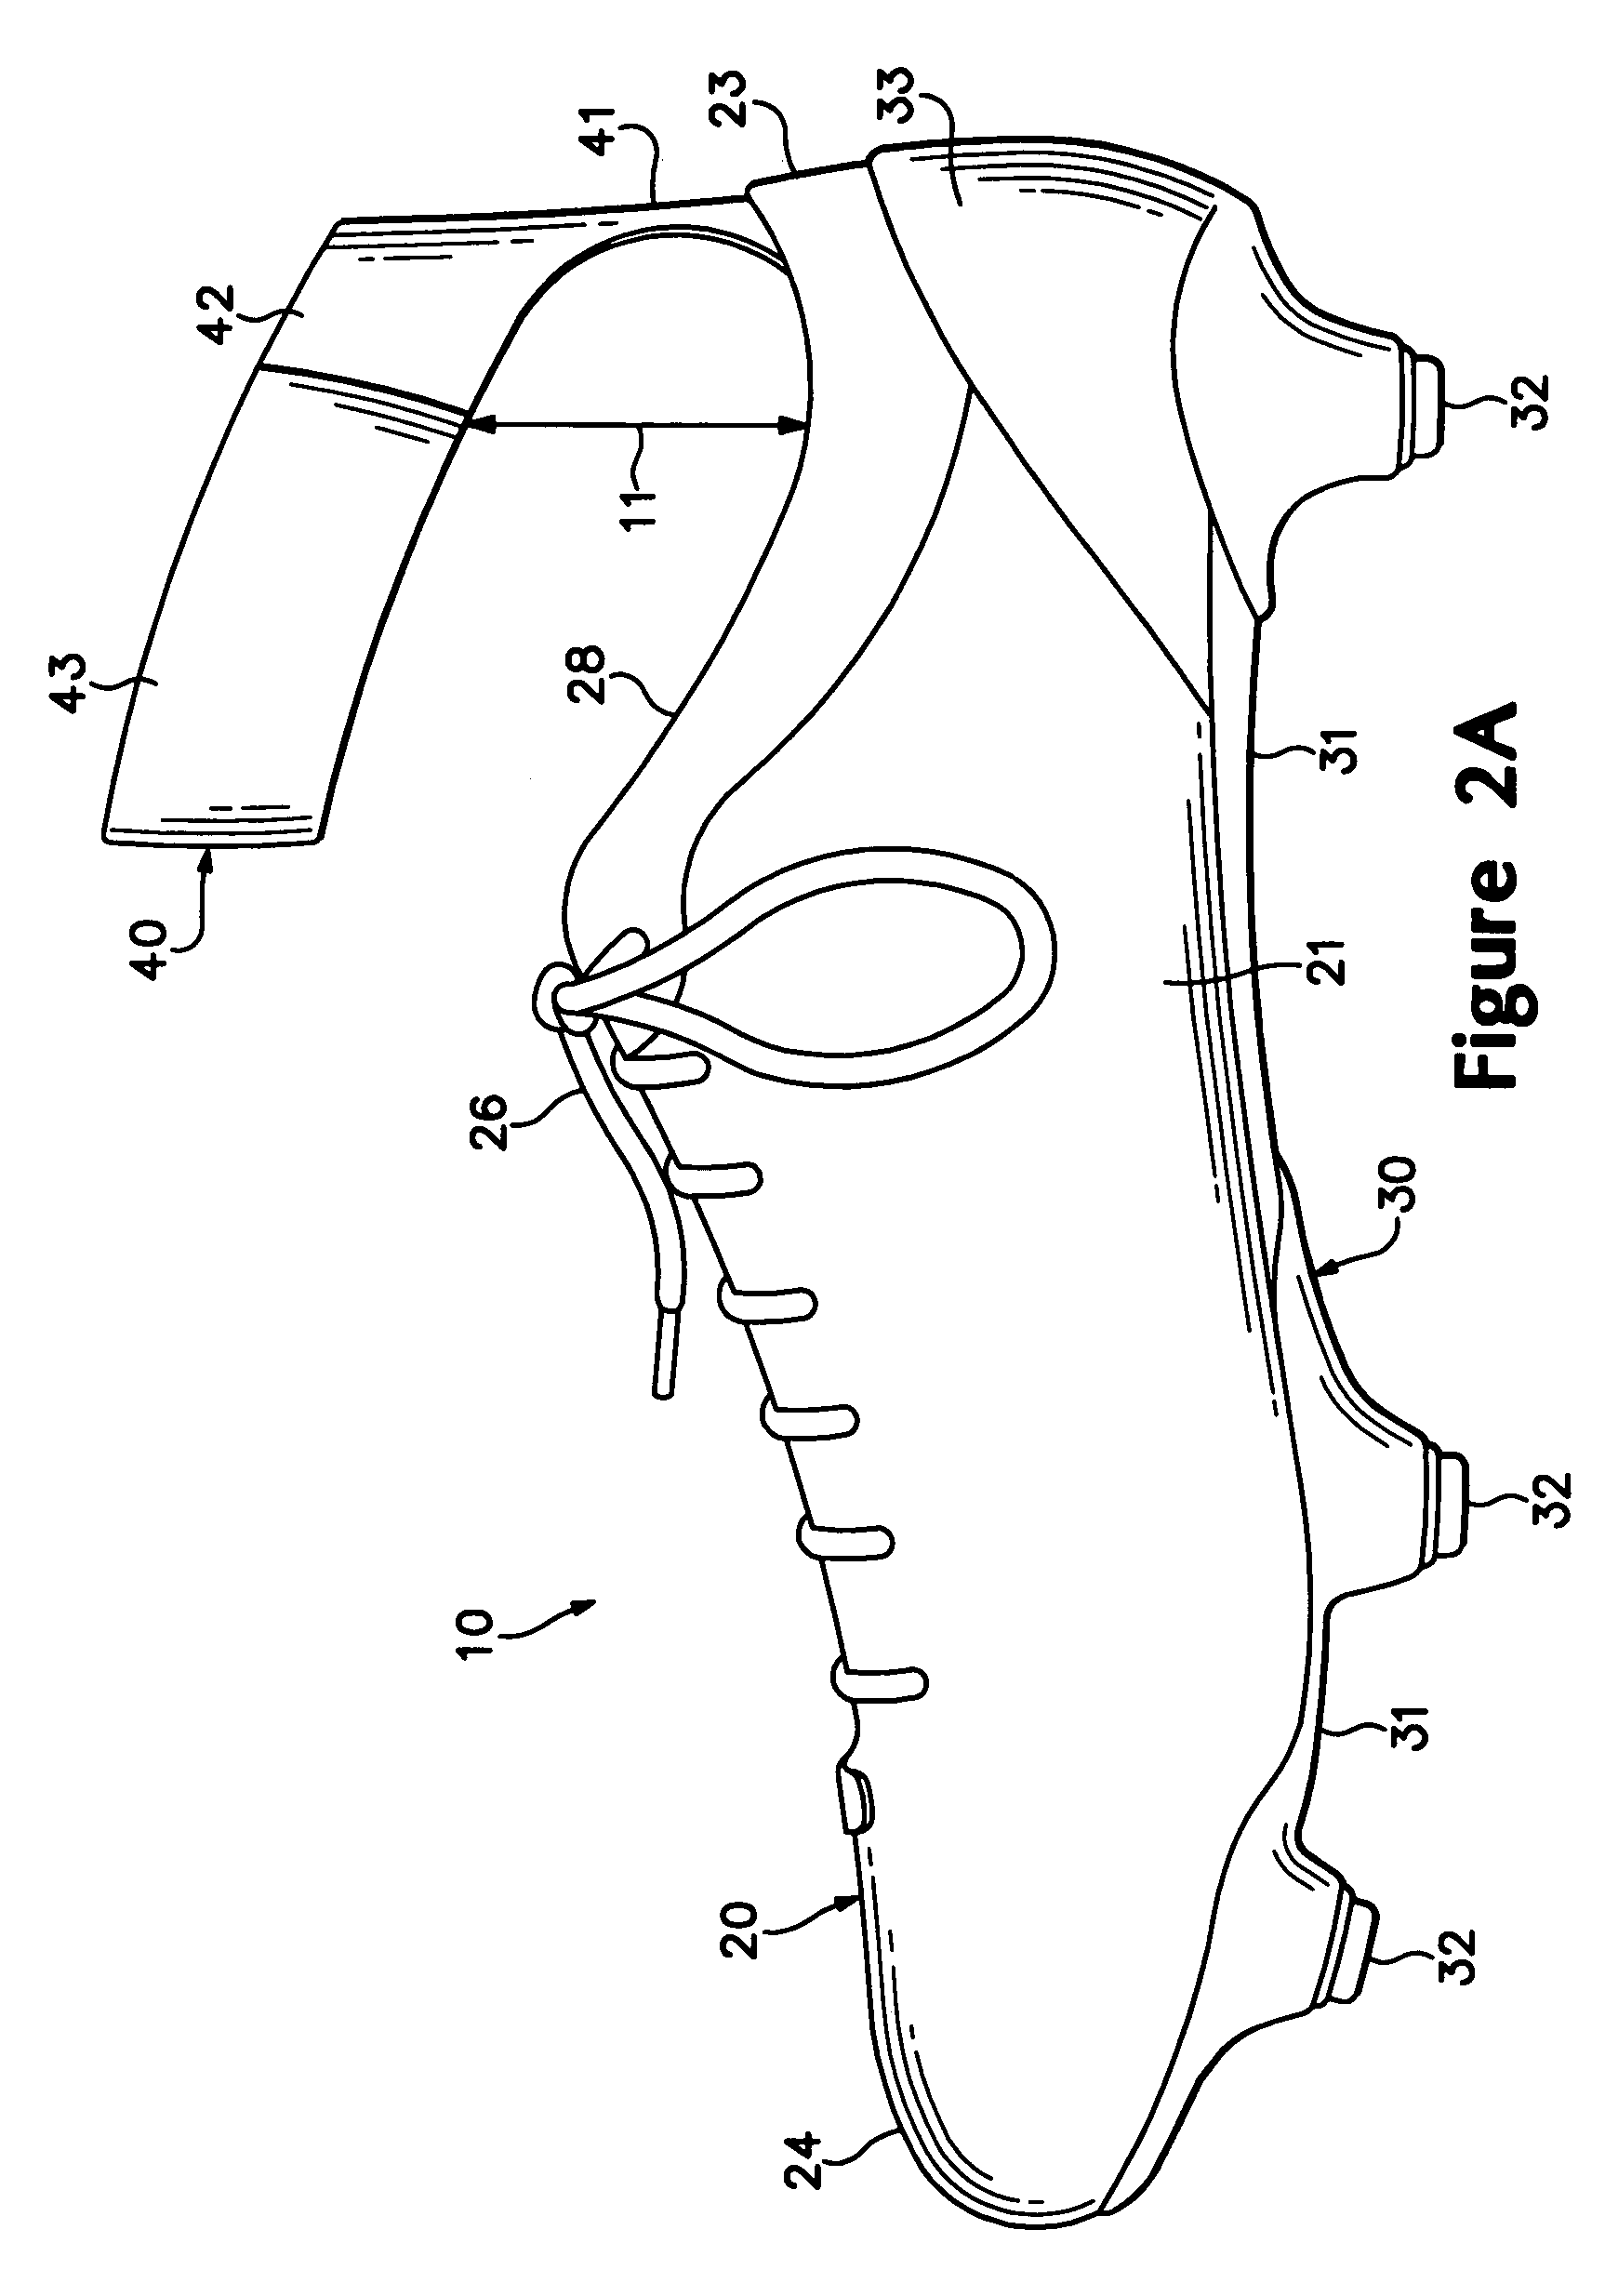 Article of athletic footwear with a leash